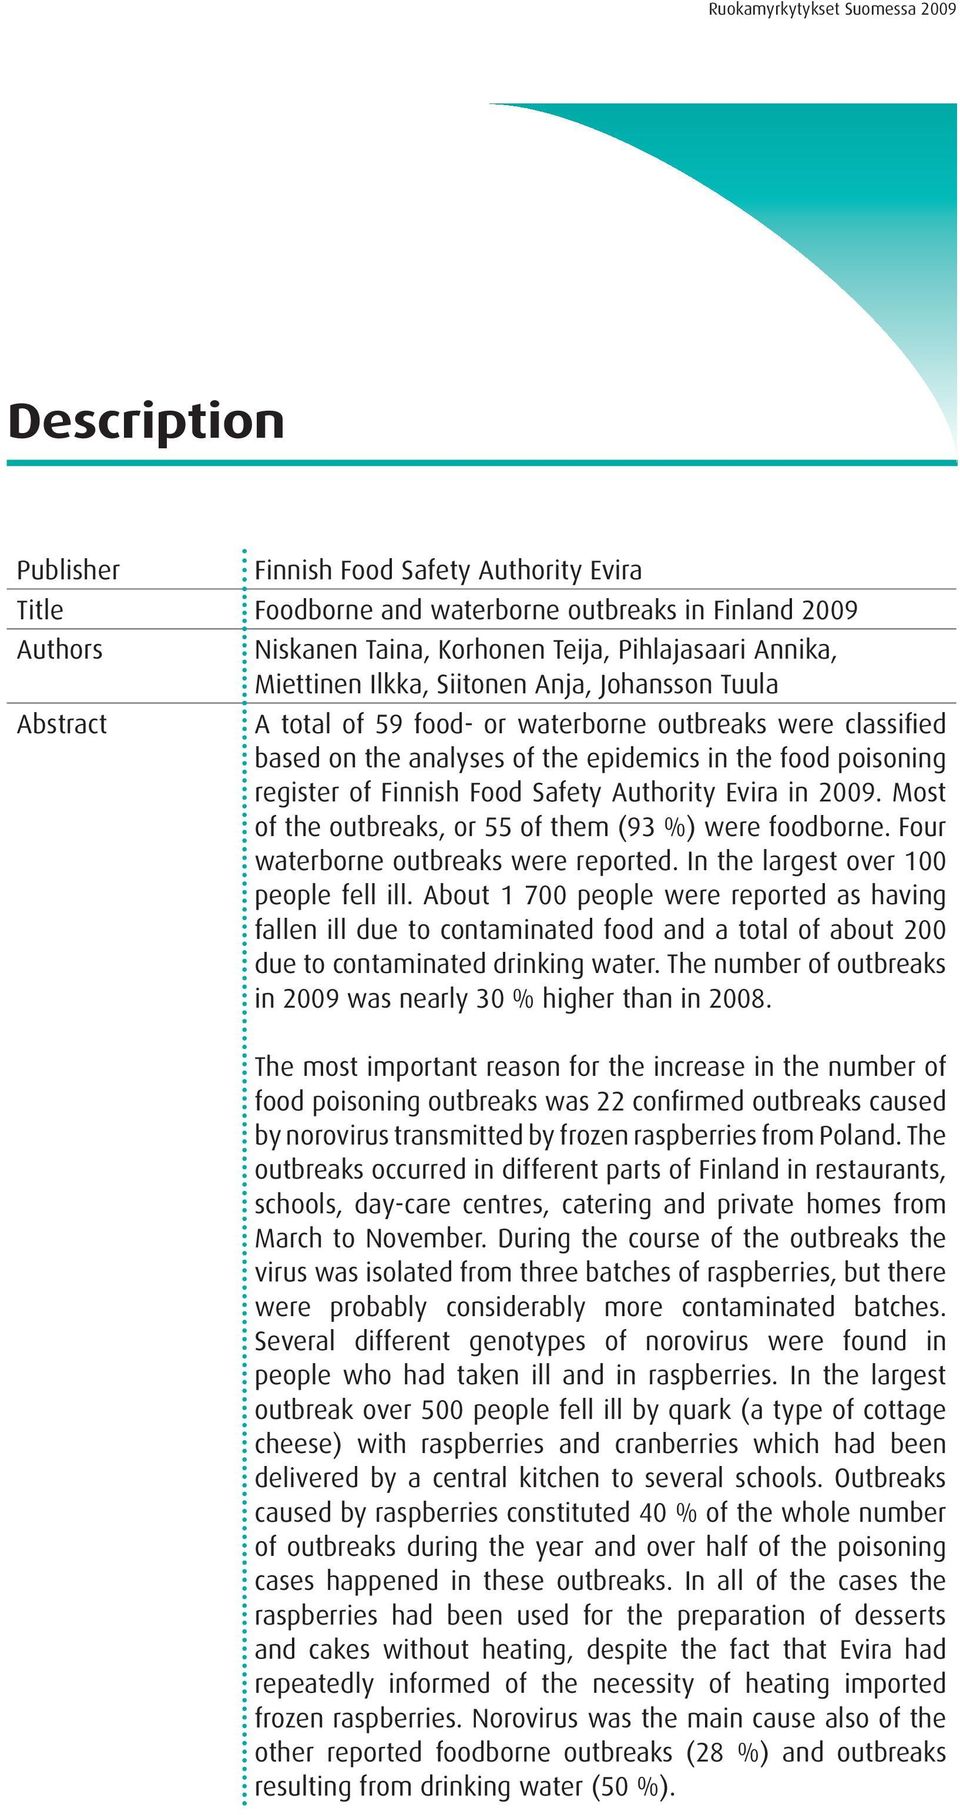 of Finnish Food Safety Authority Evira in 2009. Most of the outbreaks, or 55 of them (93 %) were foodborne. Four waterborne outbreaks were reported. In the largest over 100 people fell ill.